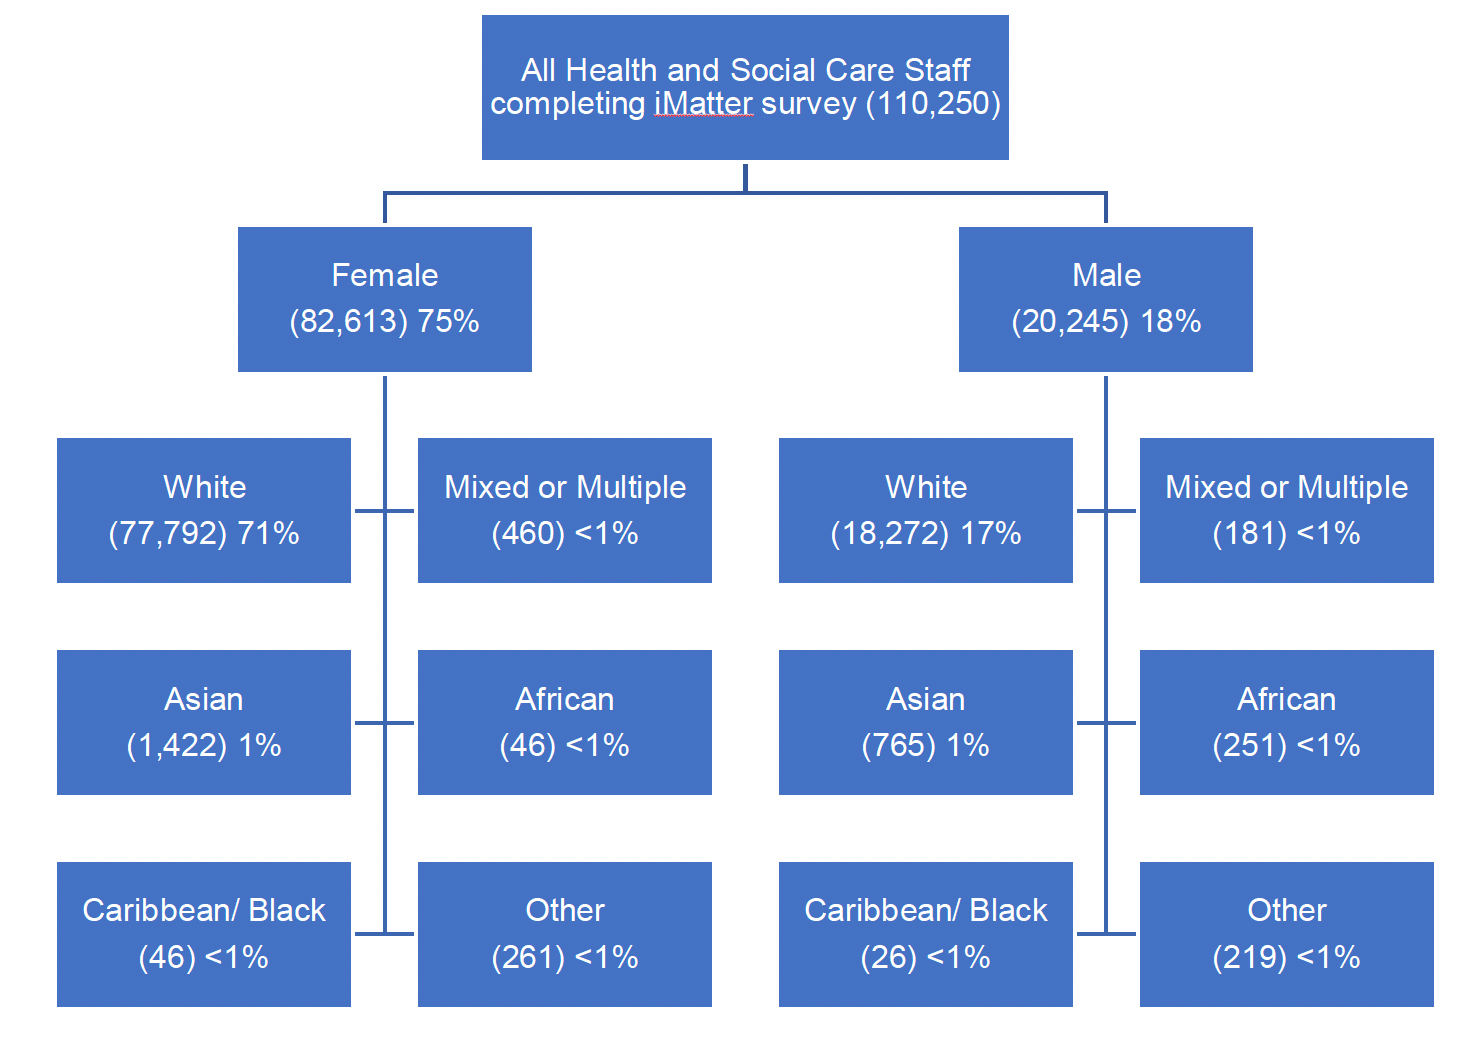 Comparison of the number of female and male health and social care staff broken down by ethnic group.  Appendix 3 presents numbers in an accessible format. 